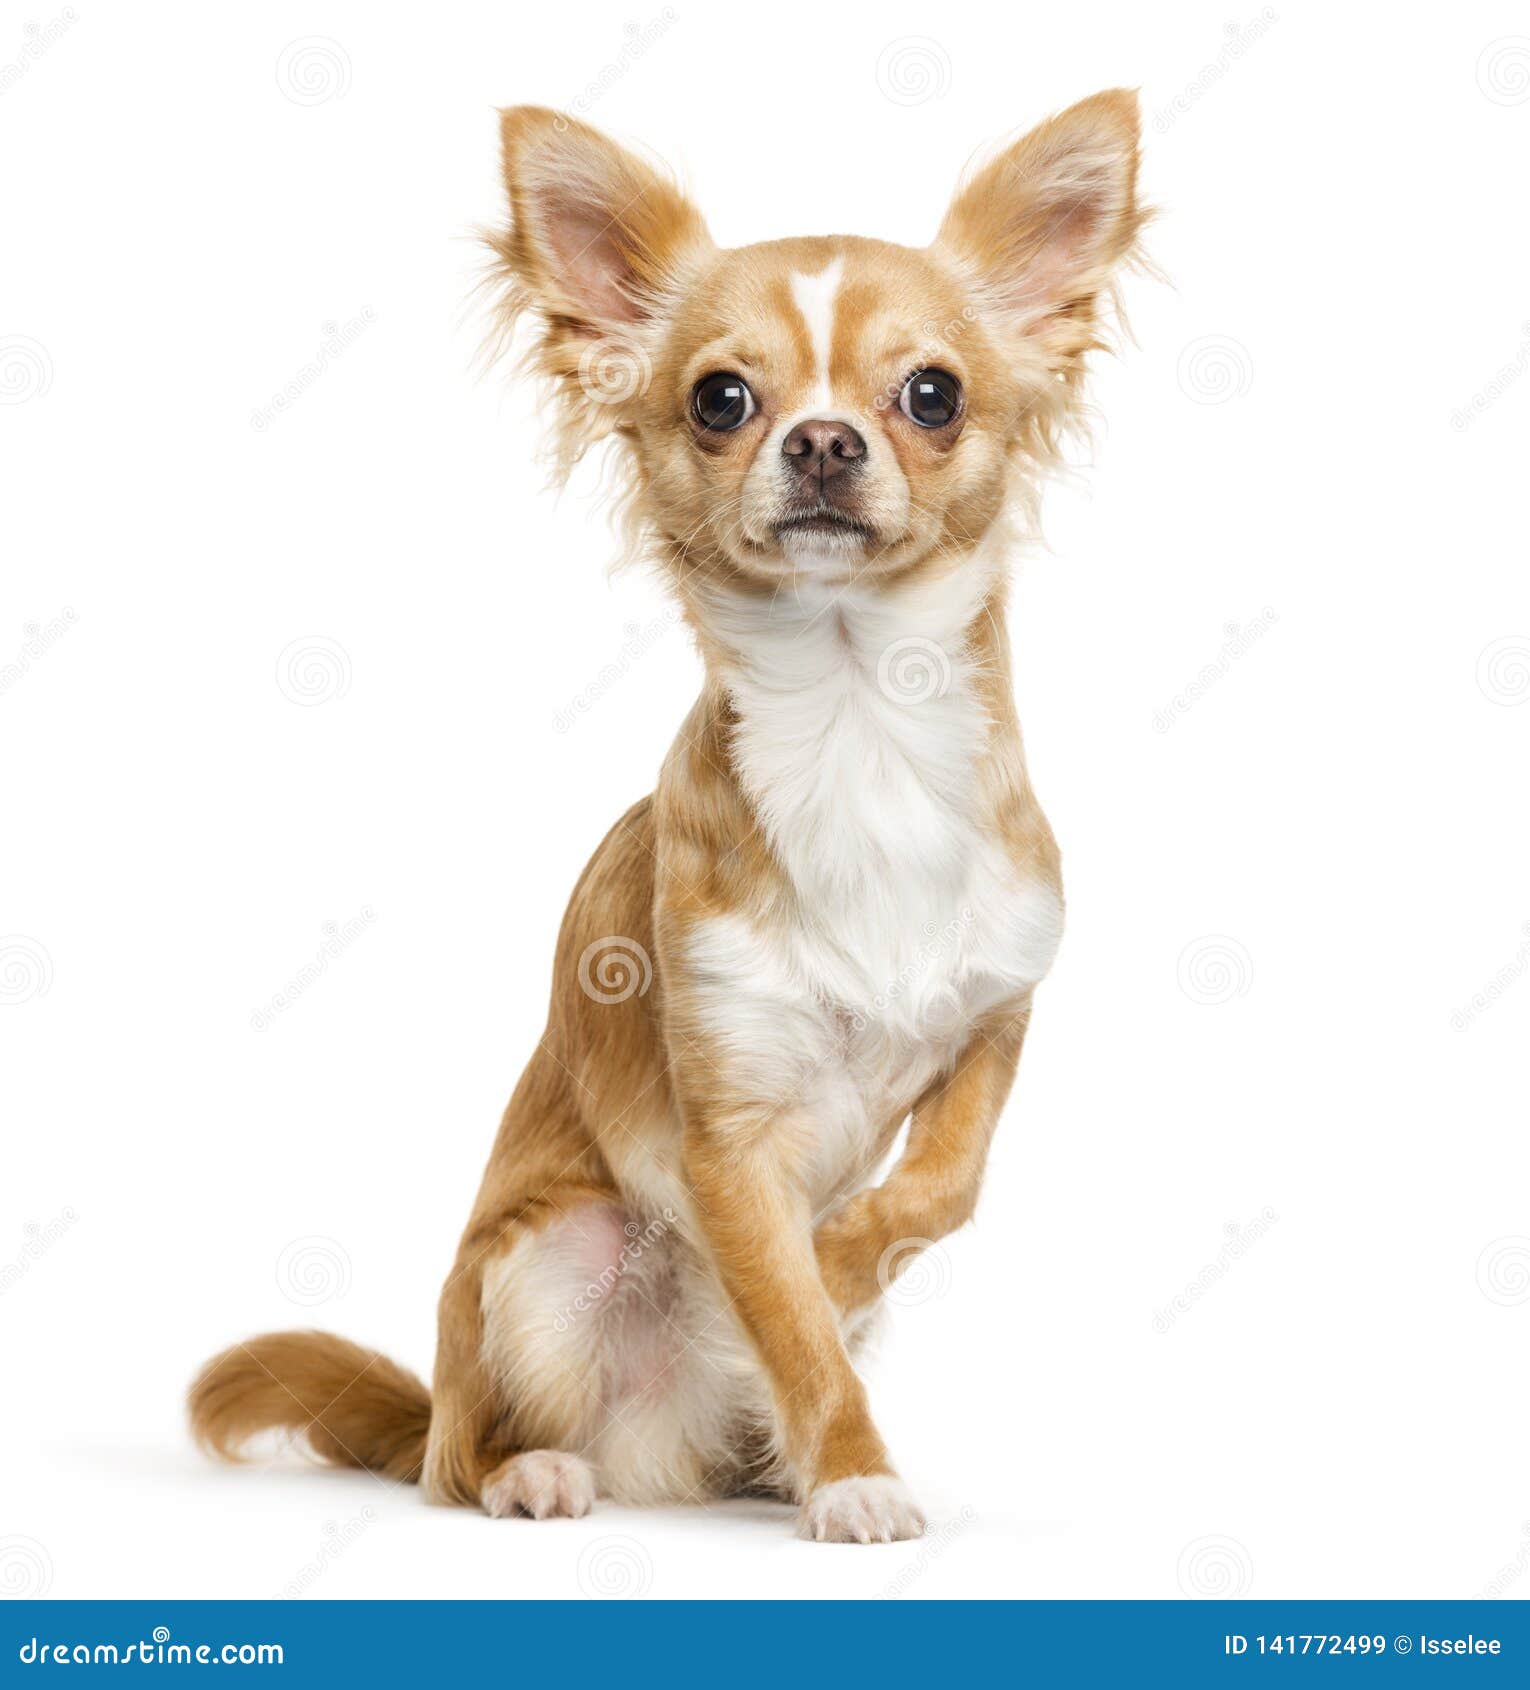 chihuahua, 9 months old, sitting in front of white background